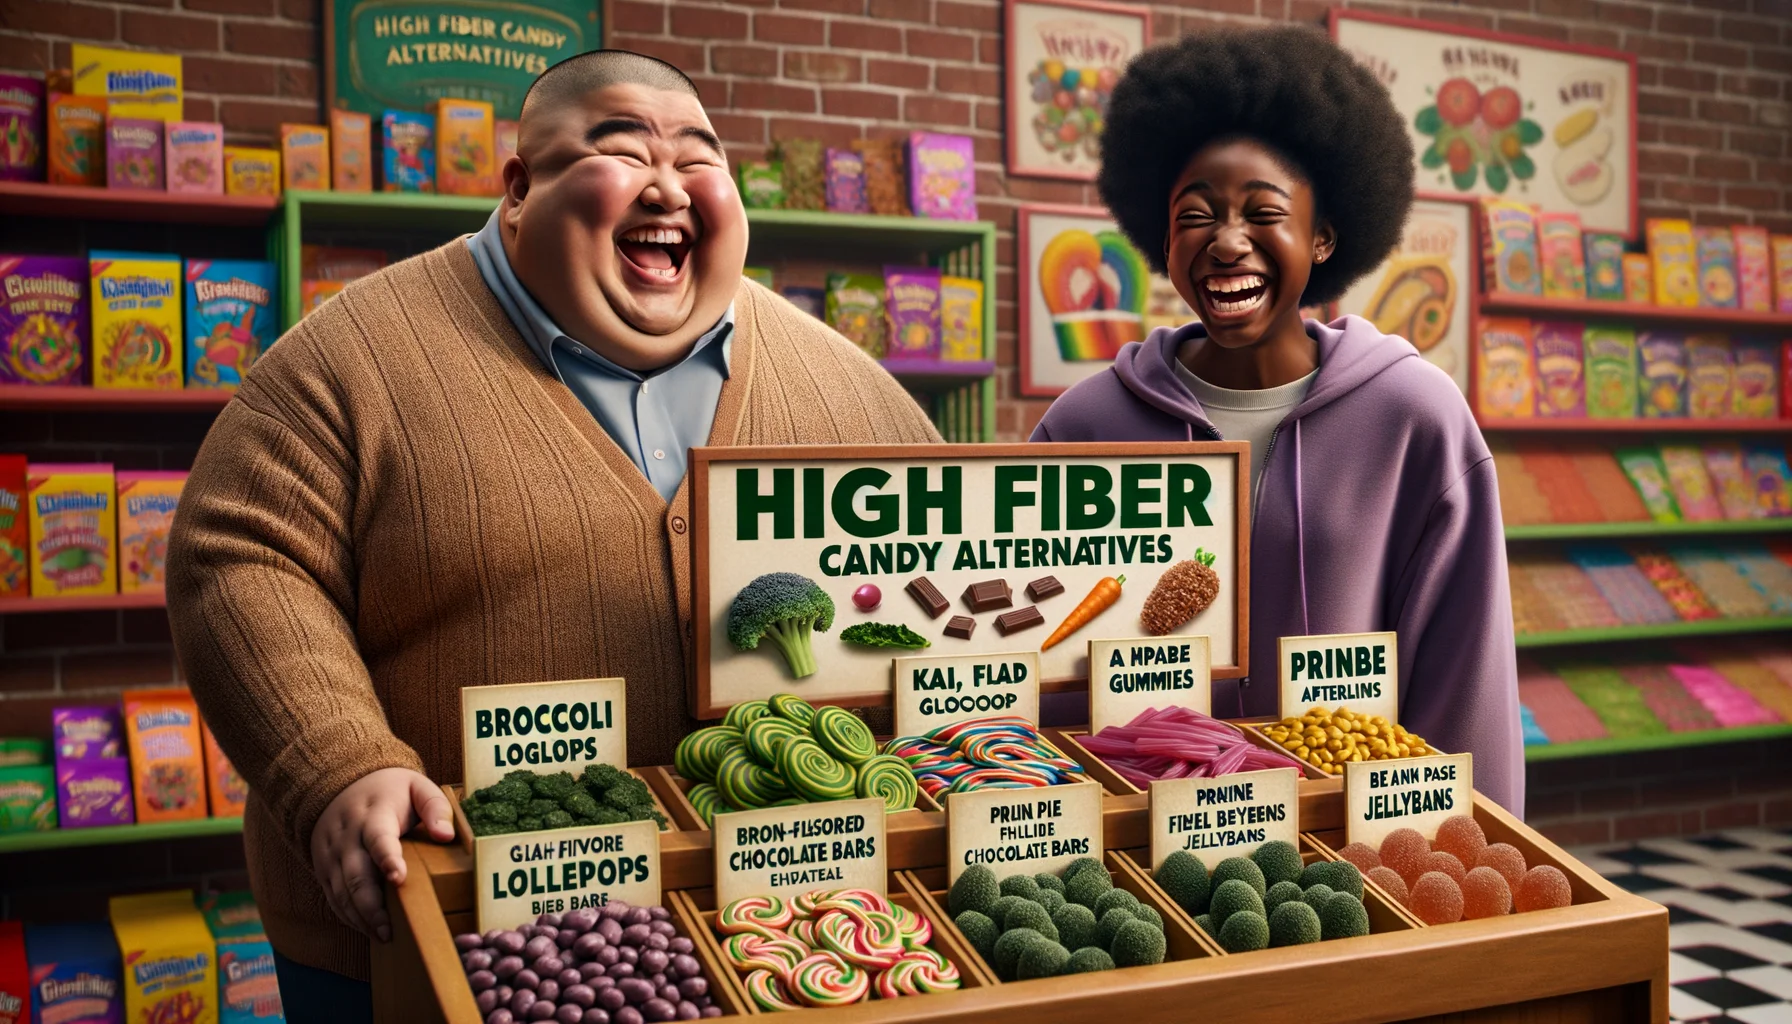 Imagine an amusing, lifelike scene in a candy store. The shopkeeper, a chubby, jolly man of South Asian descent, and a teenager, a slender Black girl, are chuckling together over a bright, colorful shelf labeled 'High Fiber Candy Alternatives'. They're examining various strange and whimsical candies like broccoli-flavored lollipops, kale gummies, prune-filled chocolate bars, and bean paste jellybeans. Their expressions are filled with humor and disbelief, adding a comedic undertone to the realistic setting.